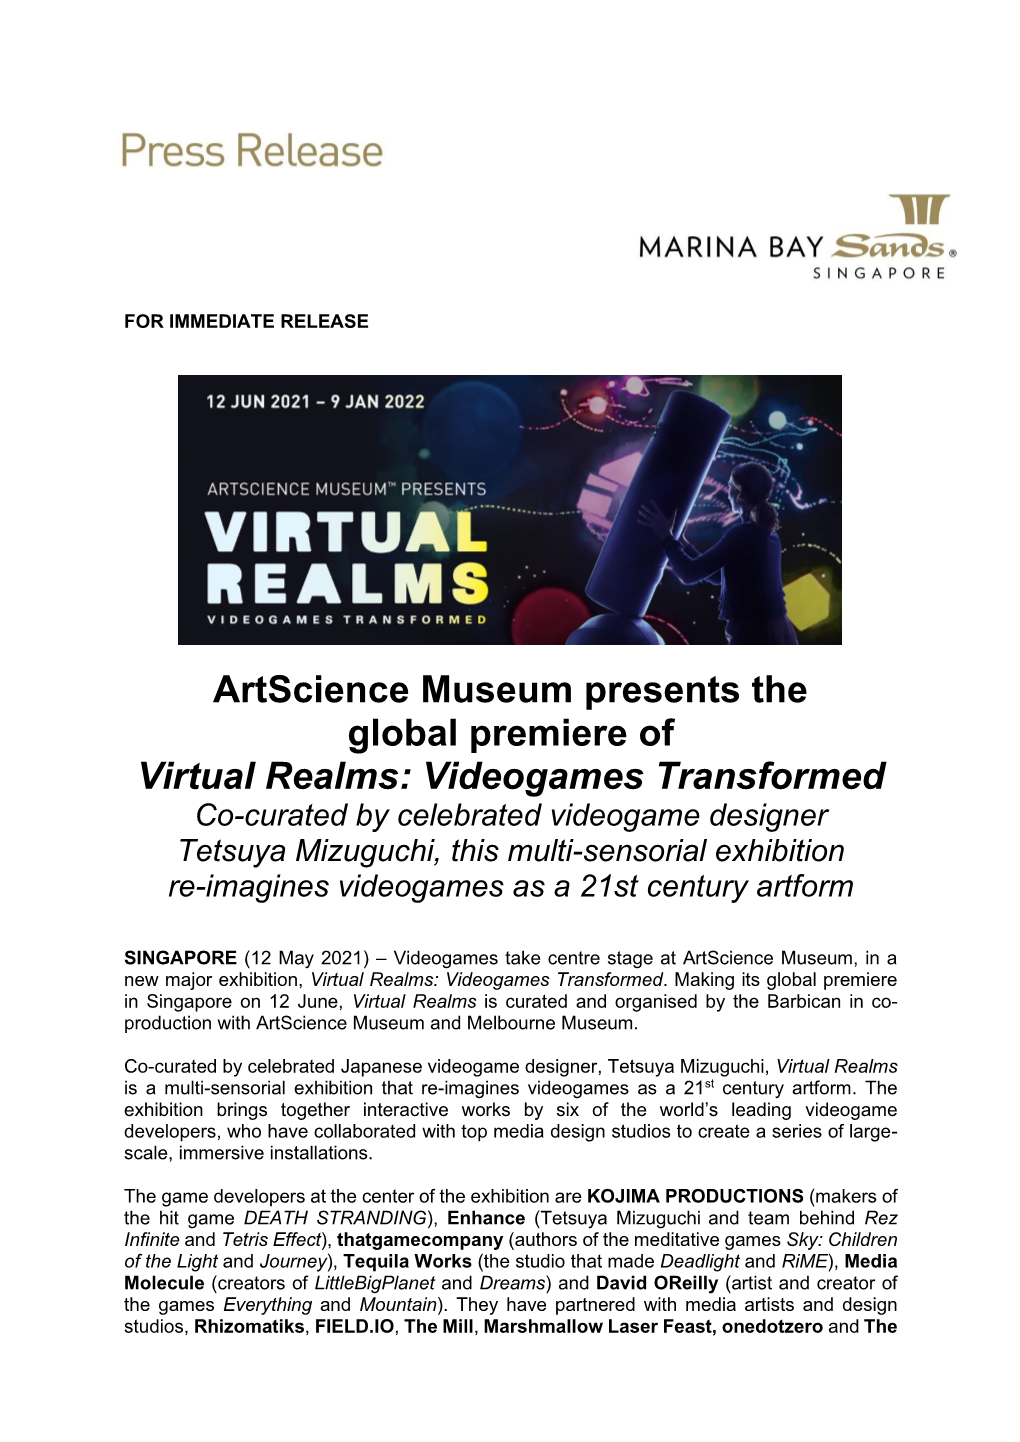 Artscience Museum Presents the Global Premiere of Virtual Realms: Videogames Transformed